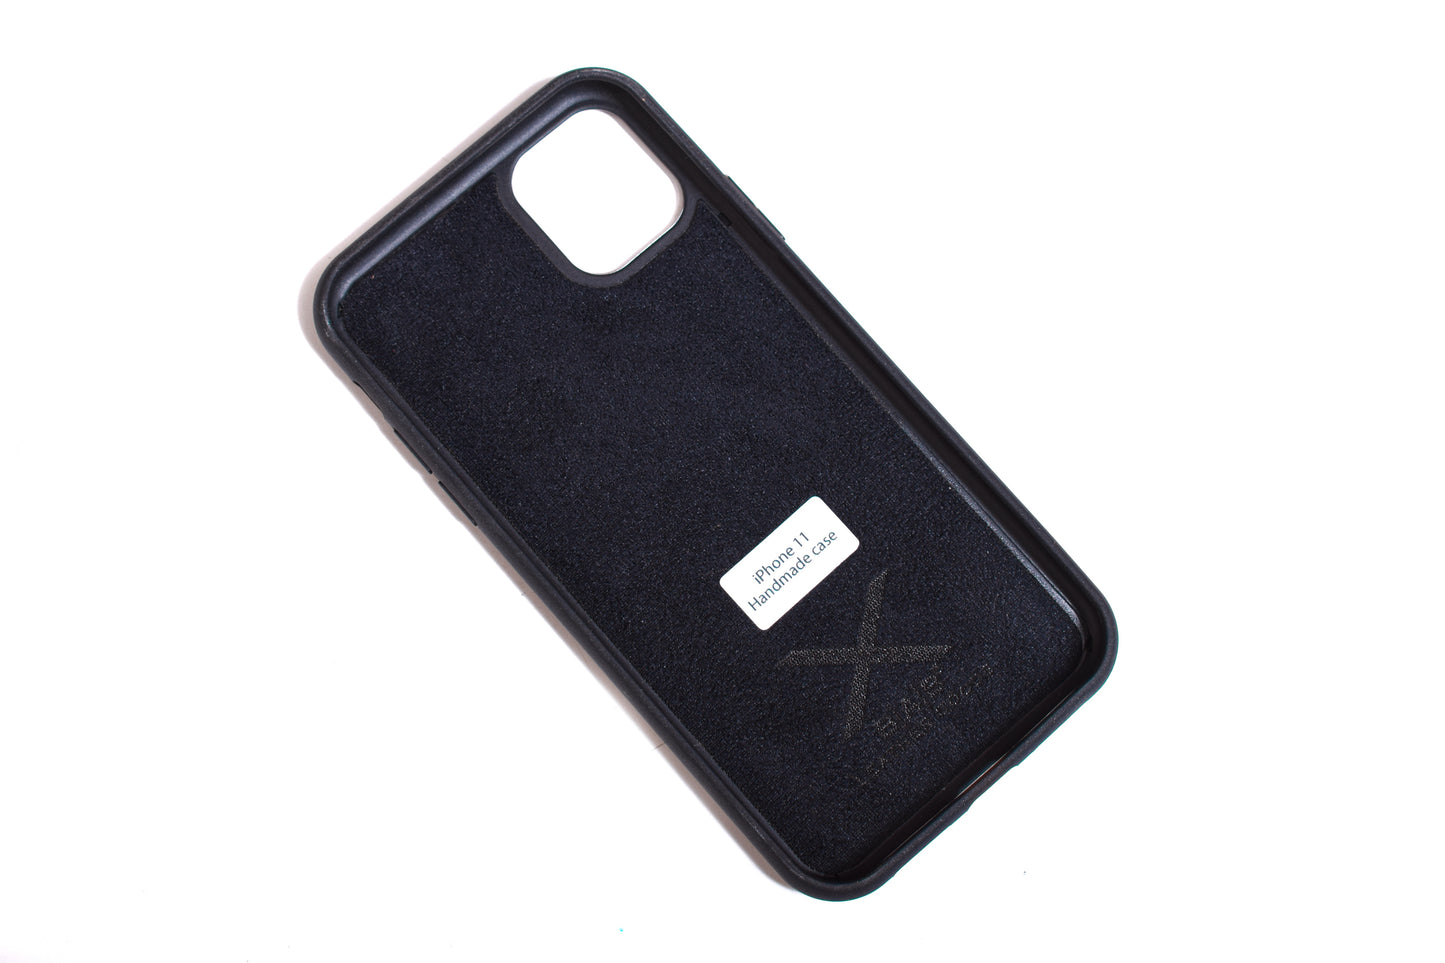 Full-Grain vegetable-tanned Genuine Leather Case for iPhone.- 50